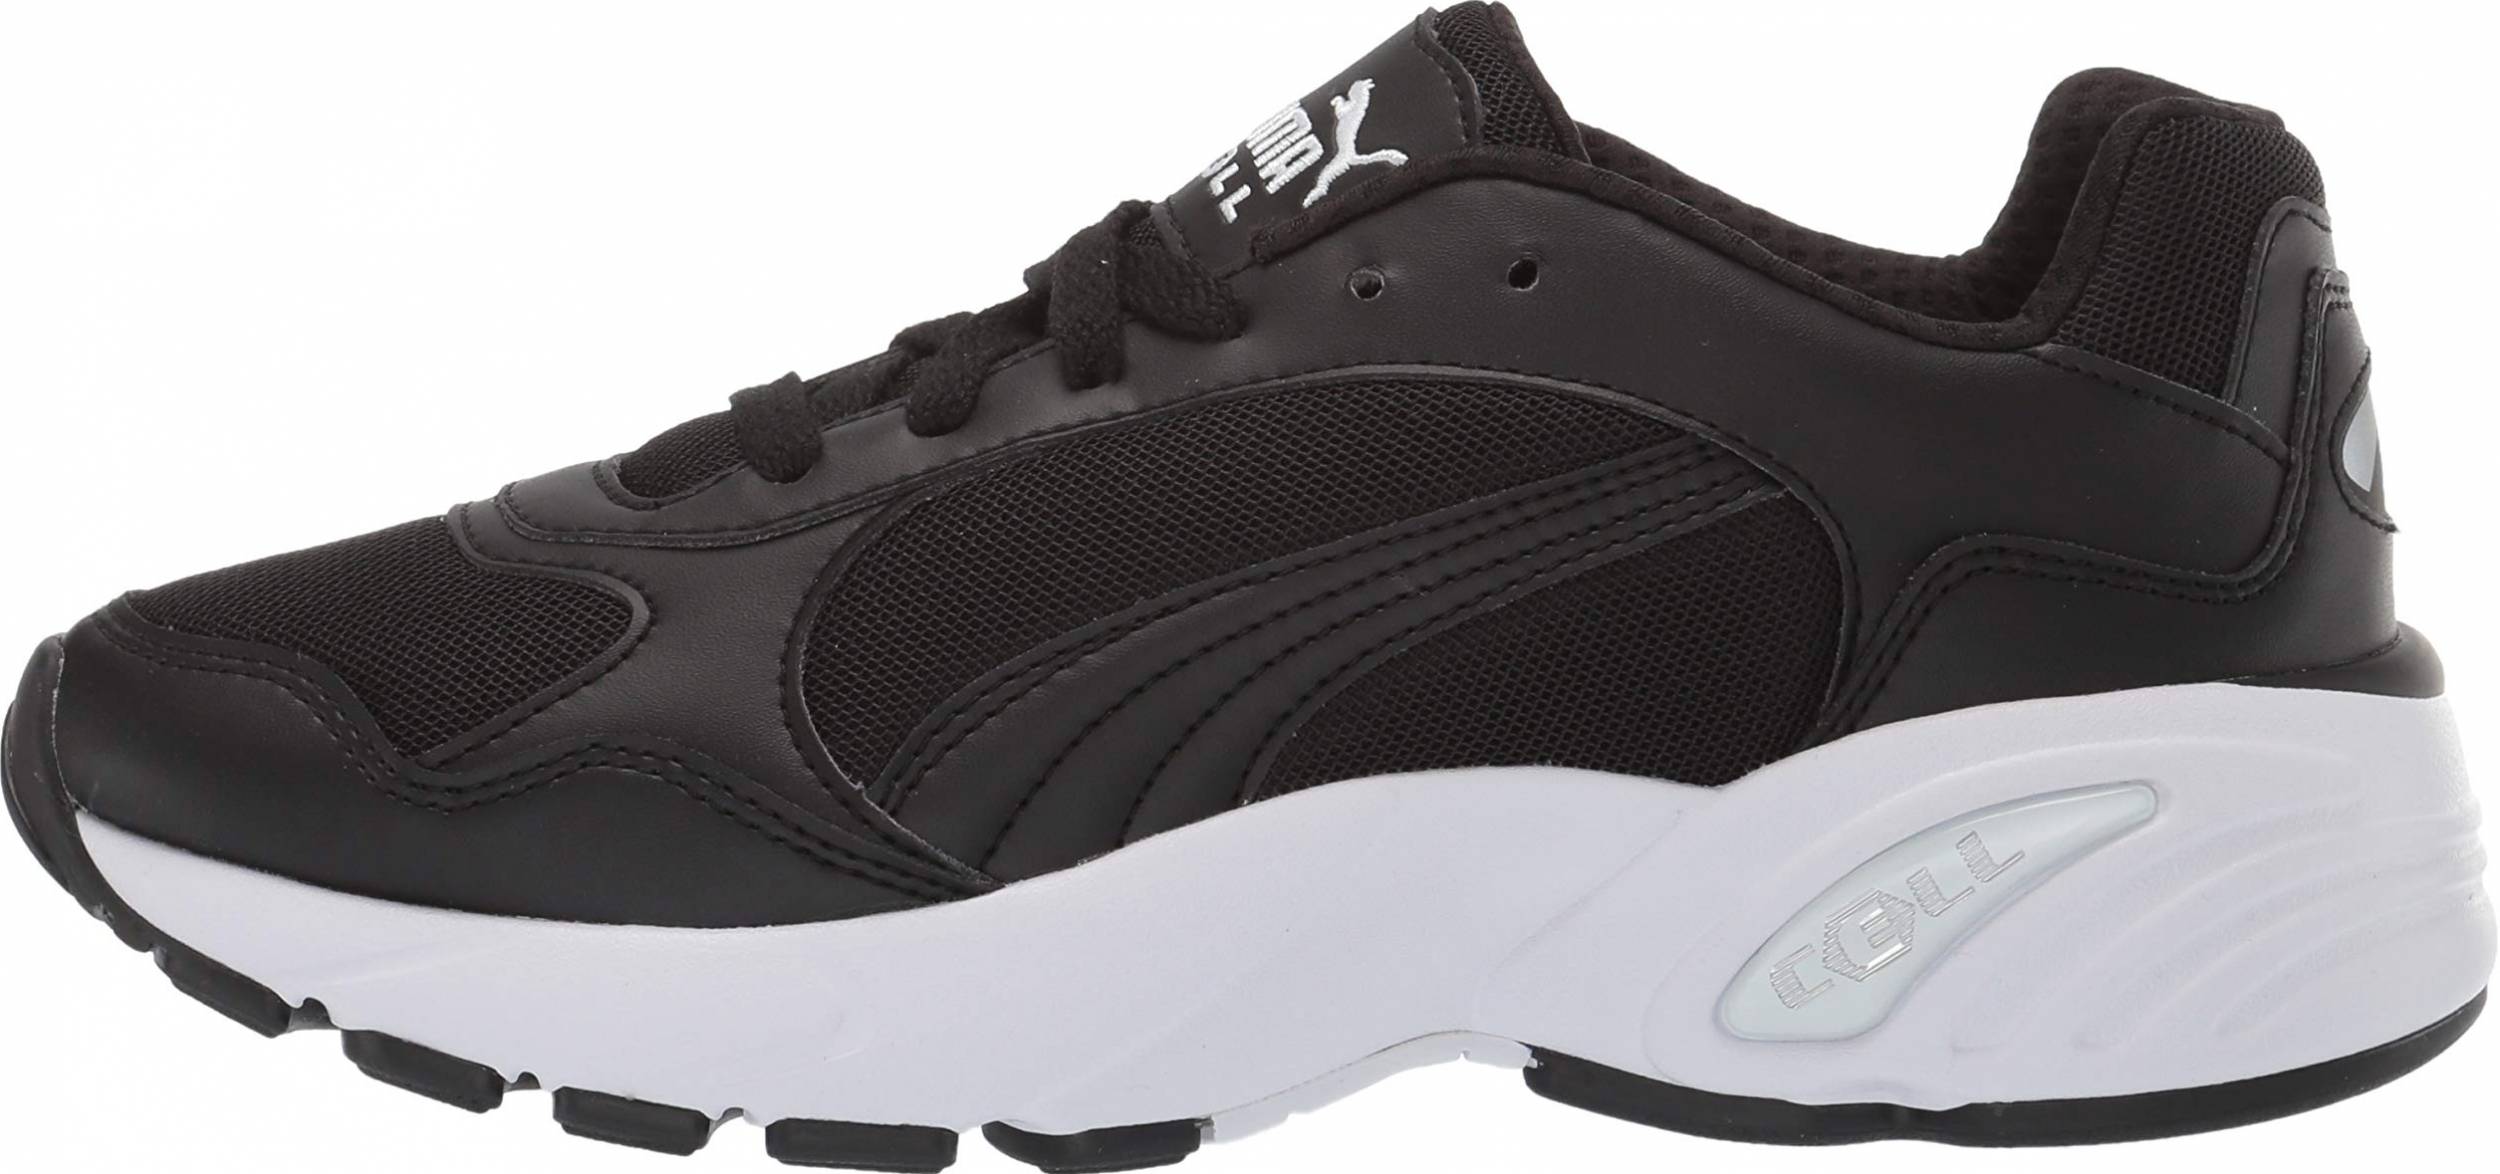 Only $24 + Review of Puma CELL Viper 